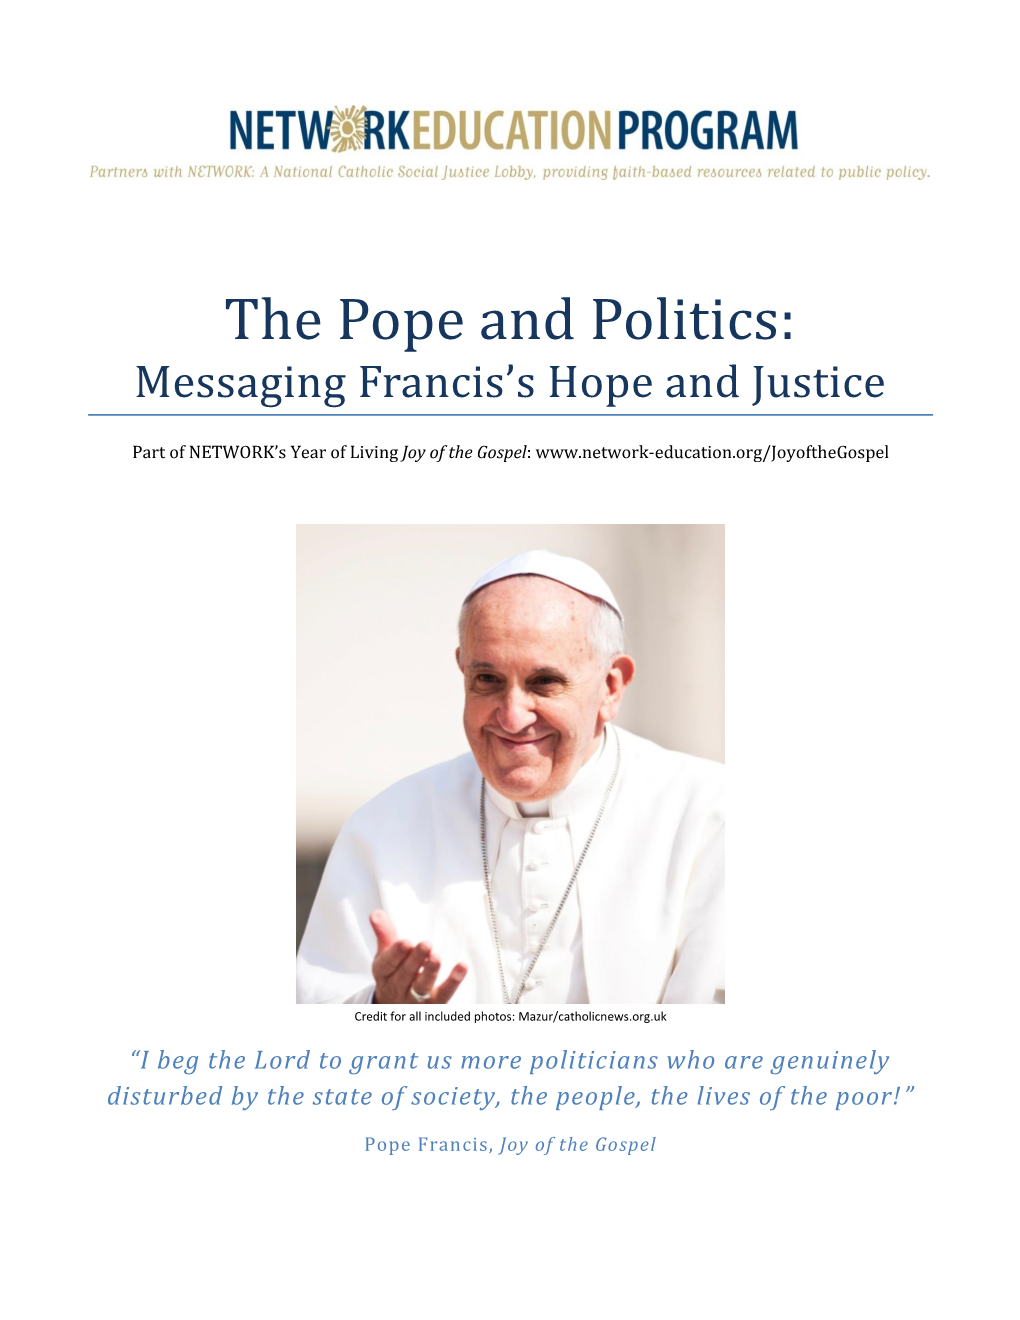 The Pope and Politics: Messaging Francis’S Hope and Justice